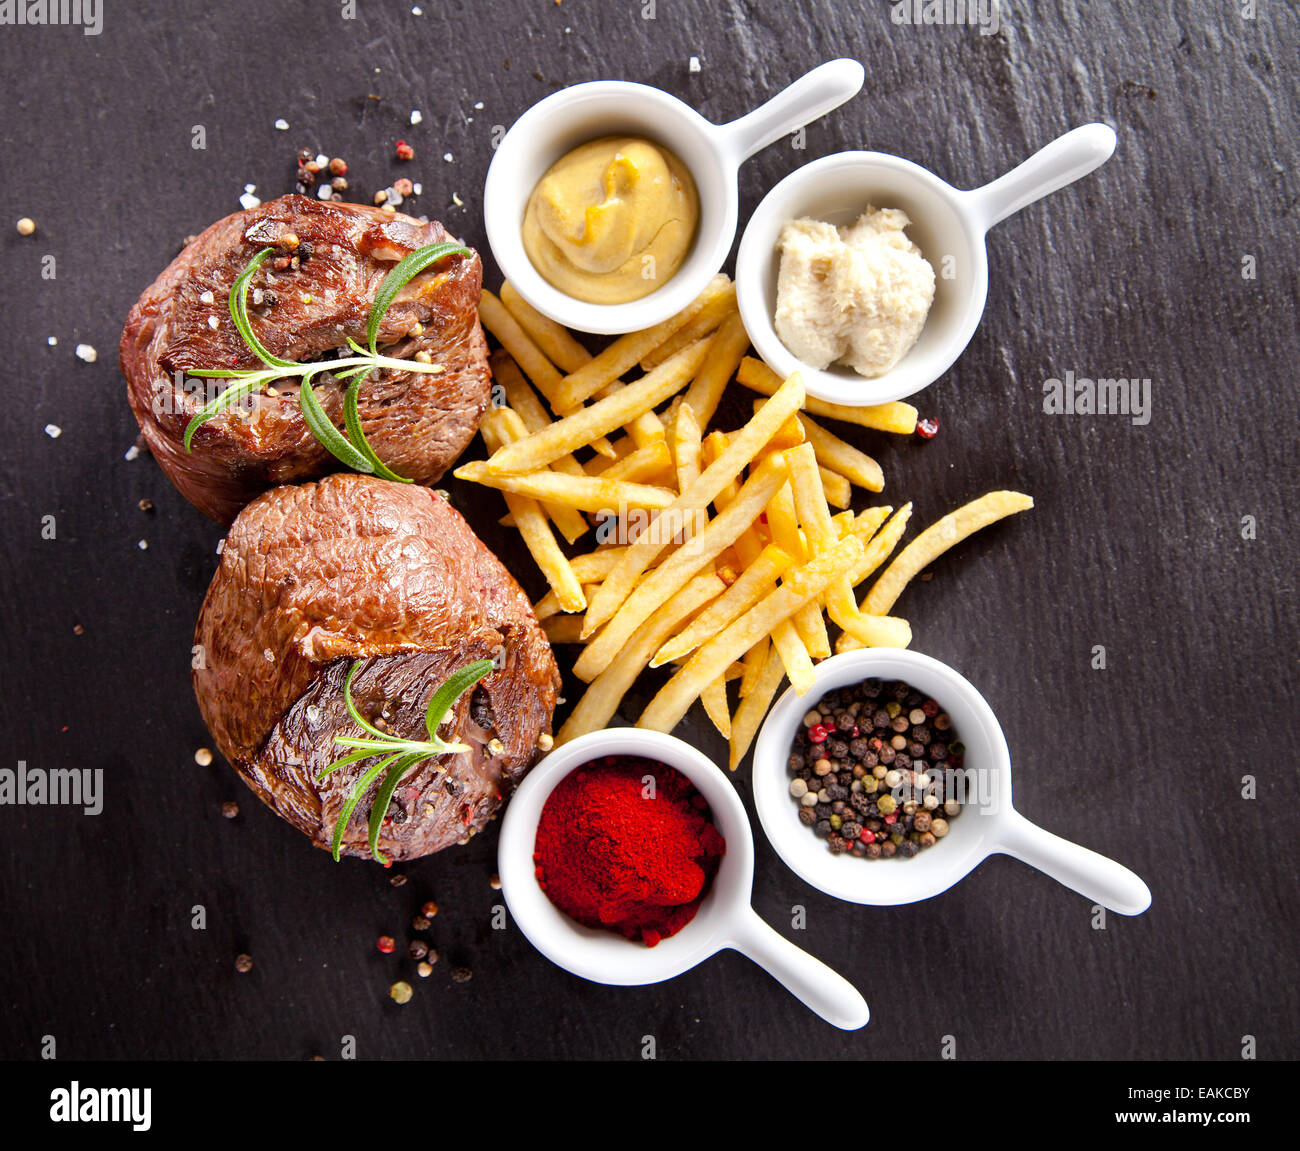 Pieces of red meat steaks with fries and spices, served on black stone surface. Stock Photo